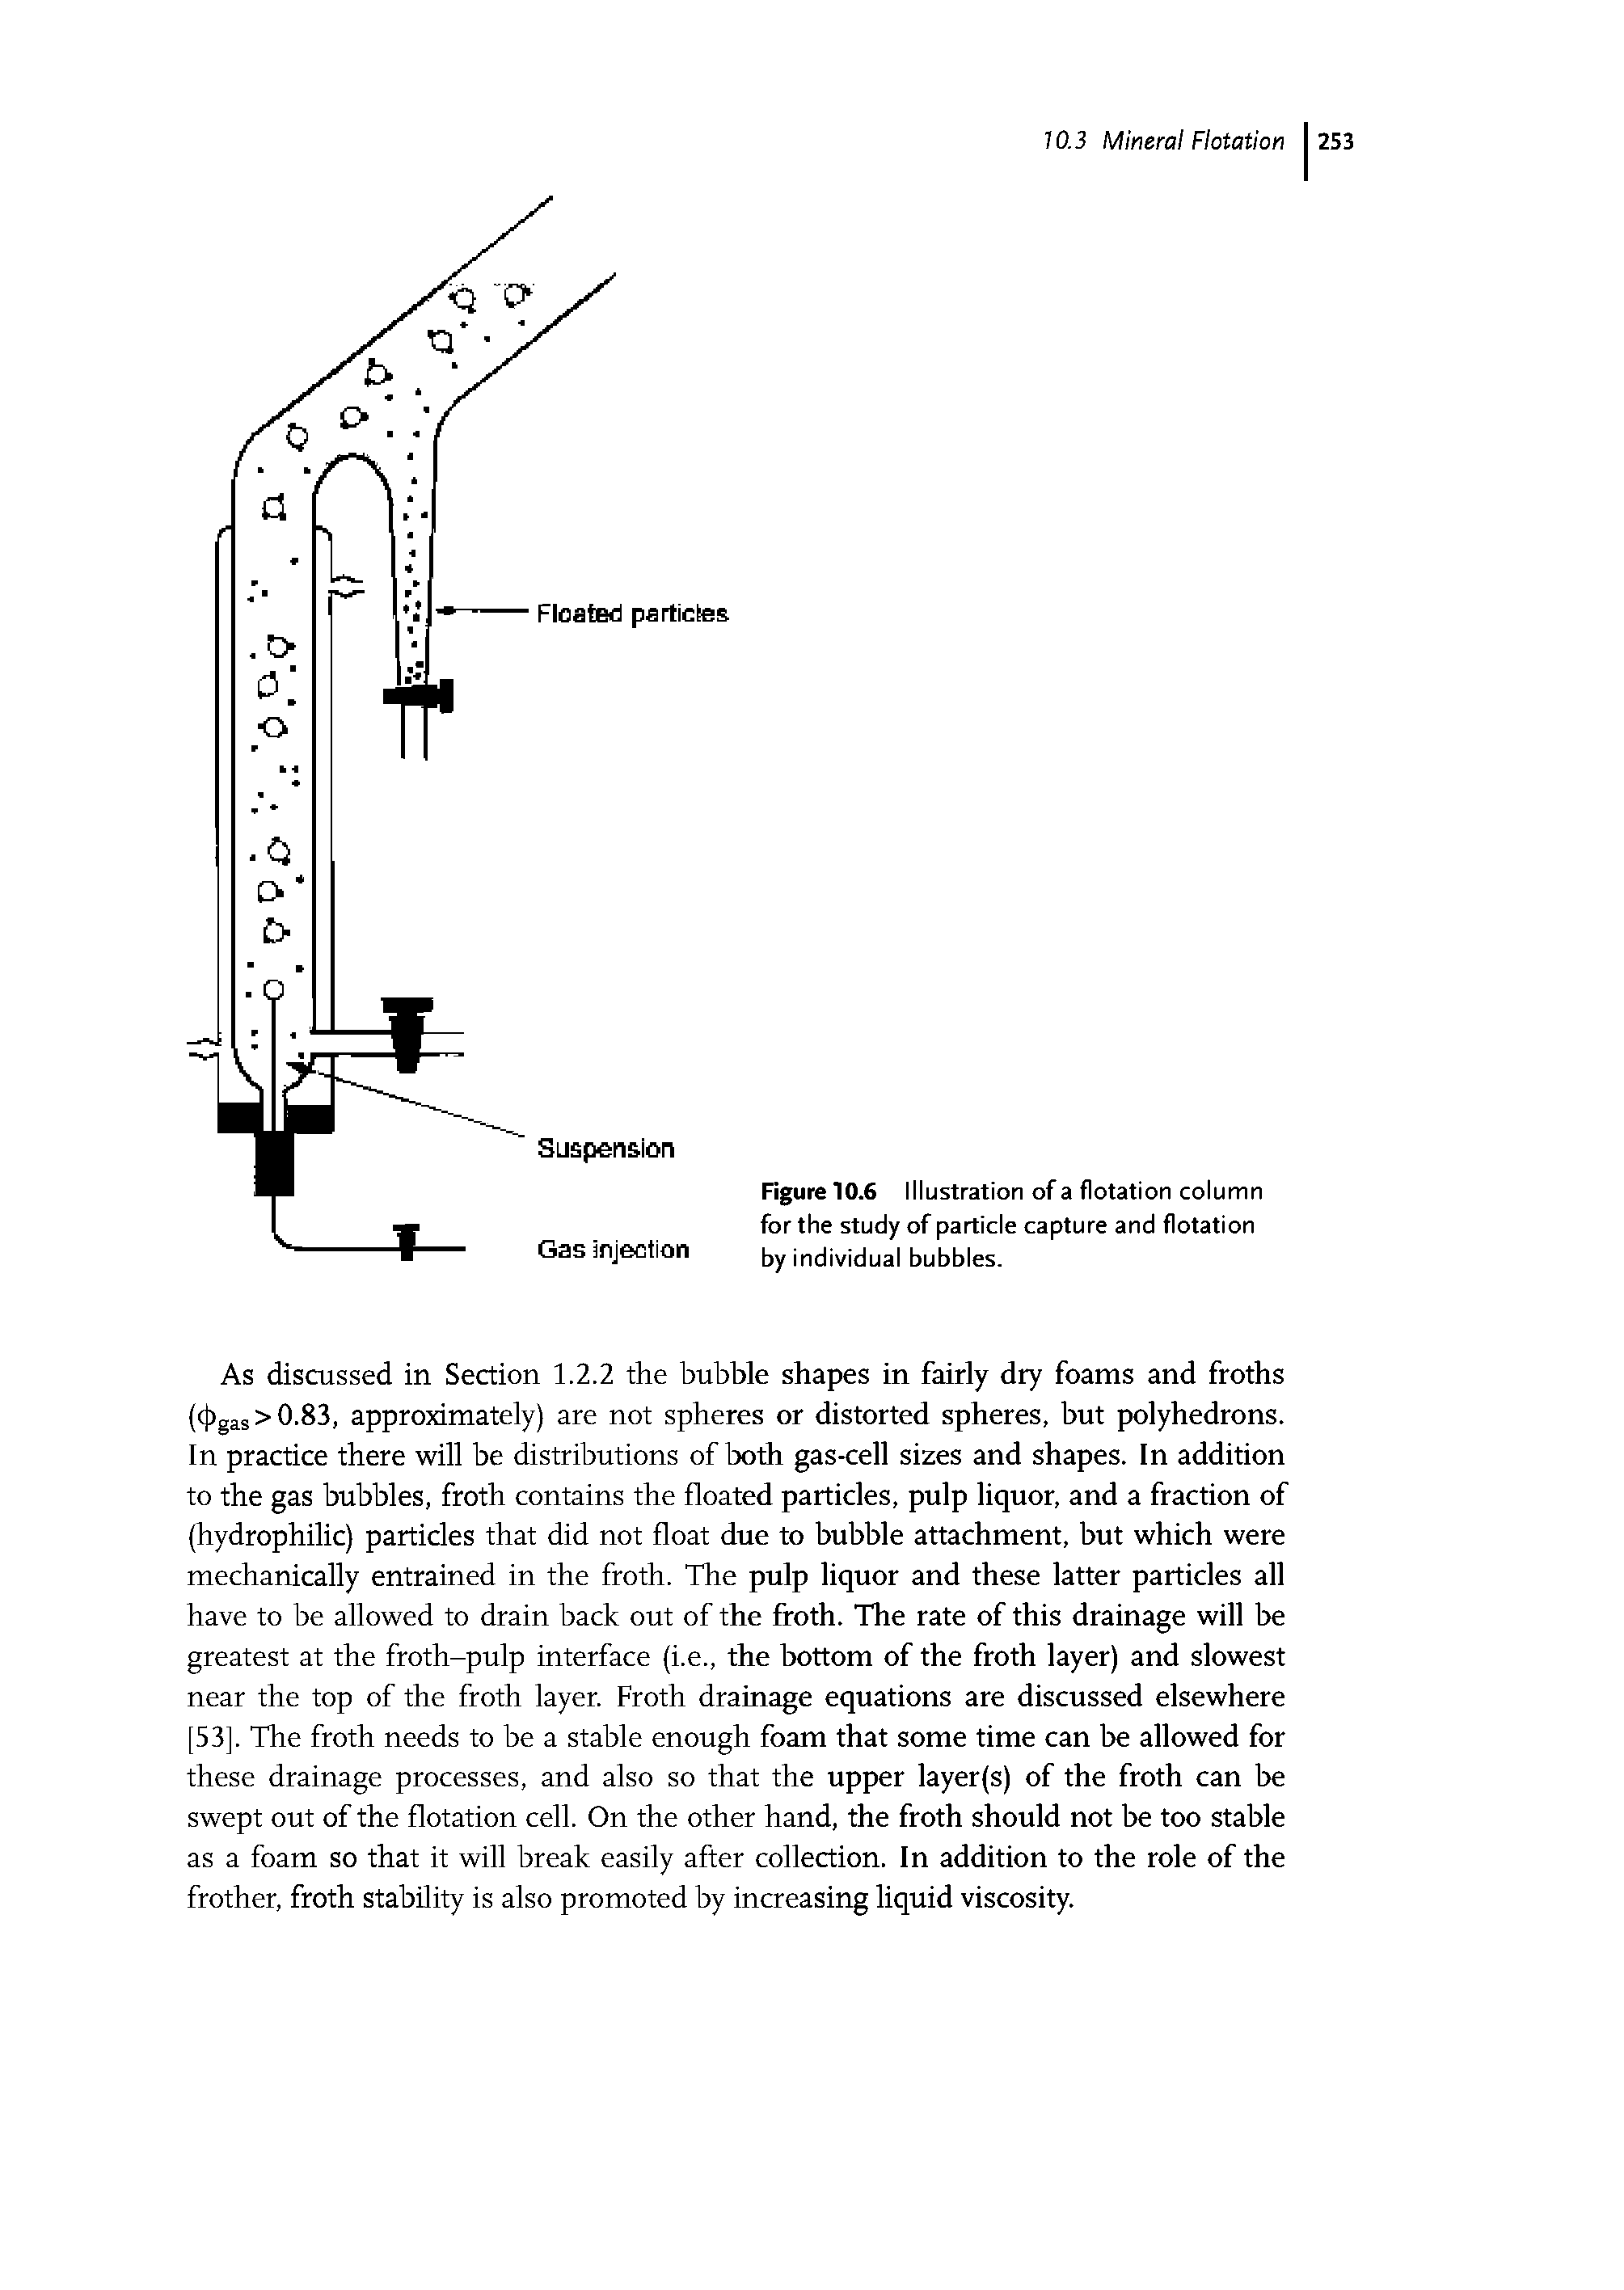 Figure 10.6 Illustration of a flotation column for the study of particle capture and flotation by individual bubbles.